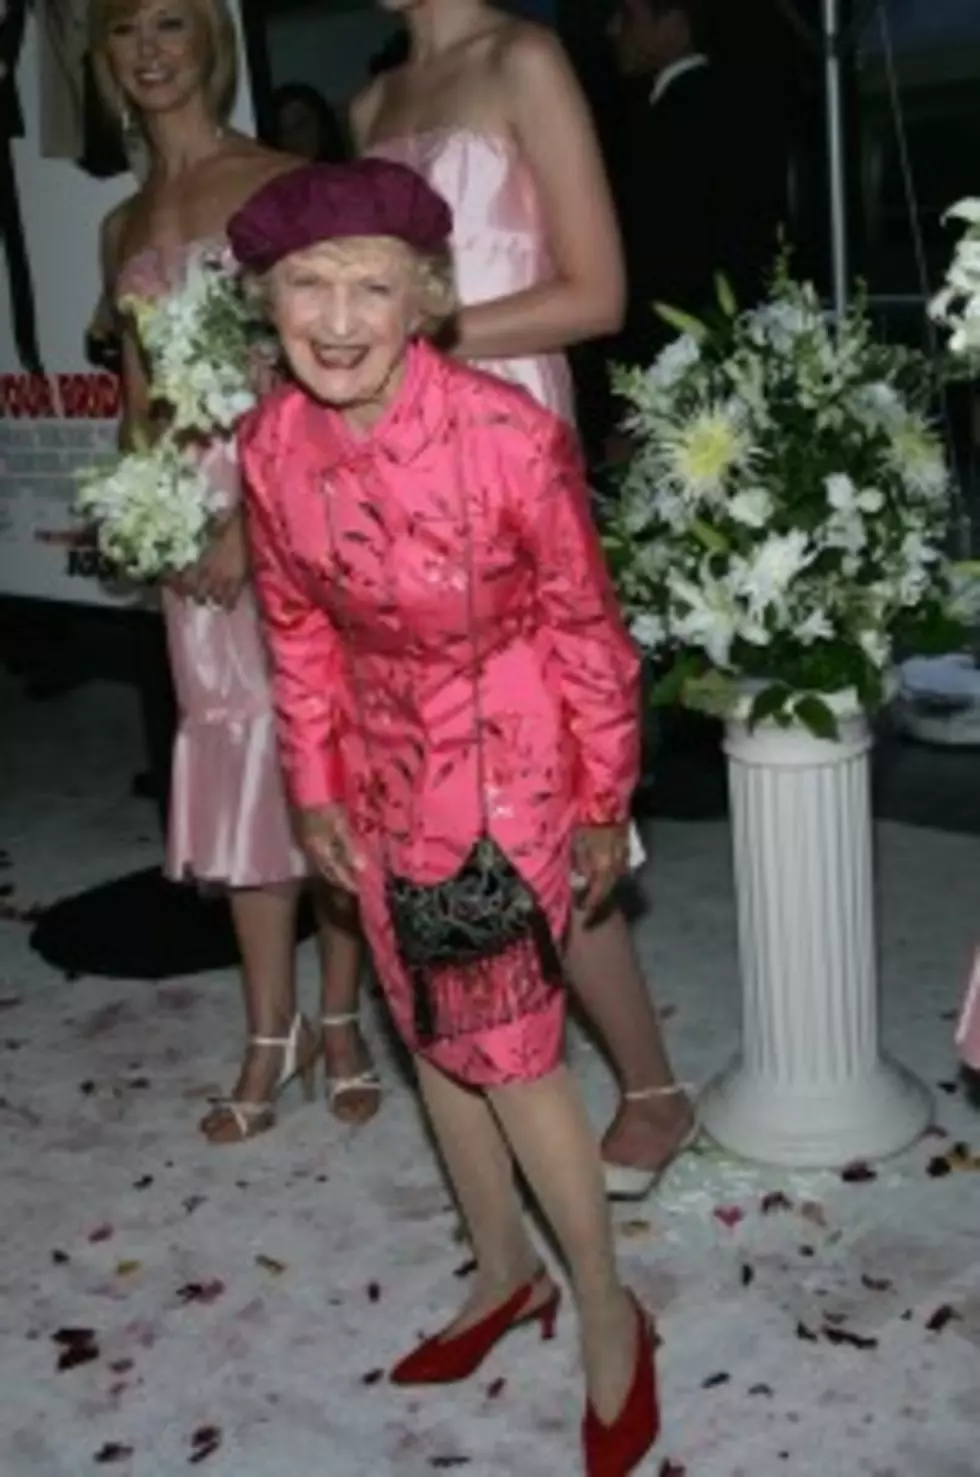 The Rapping Granny From &#8216;The Wedding Singer&#8217; Has Died At 101